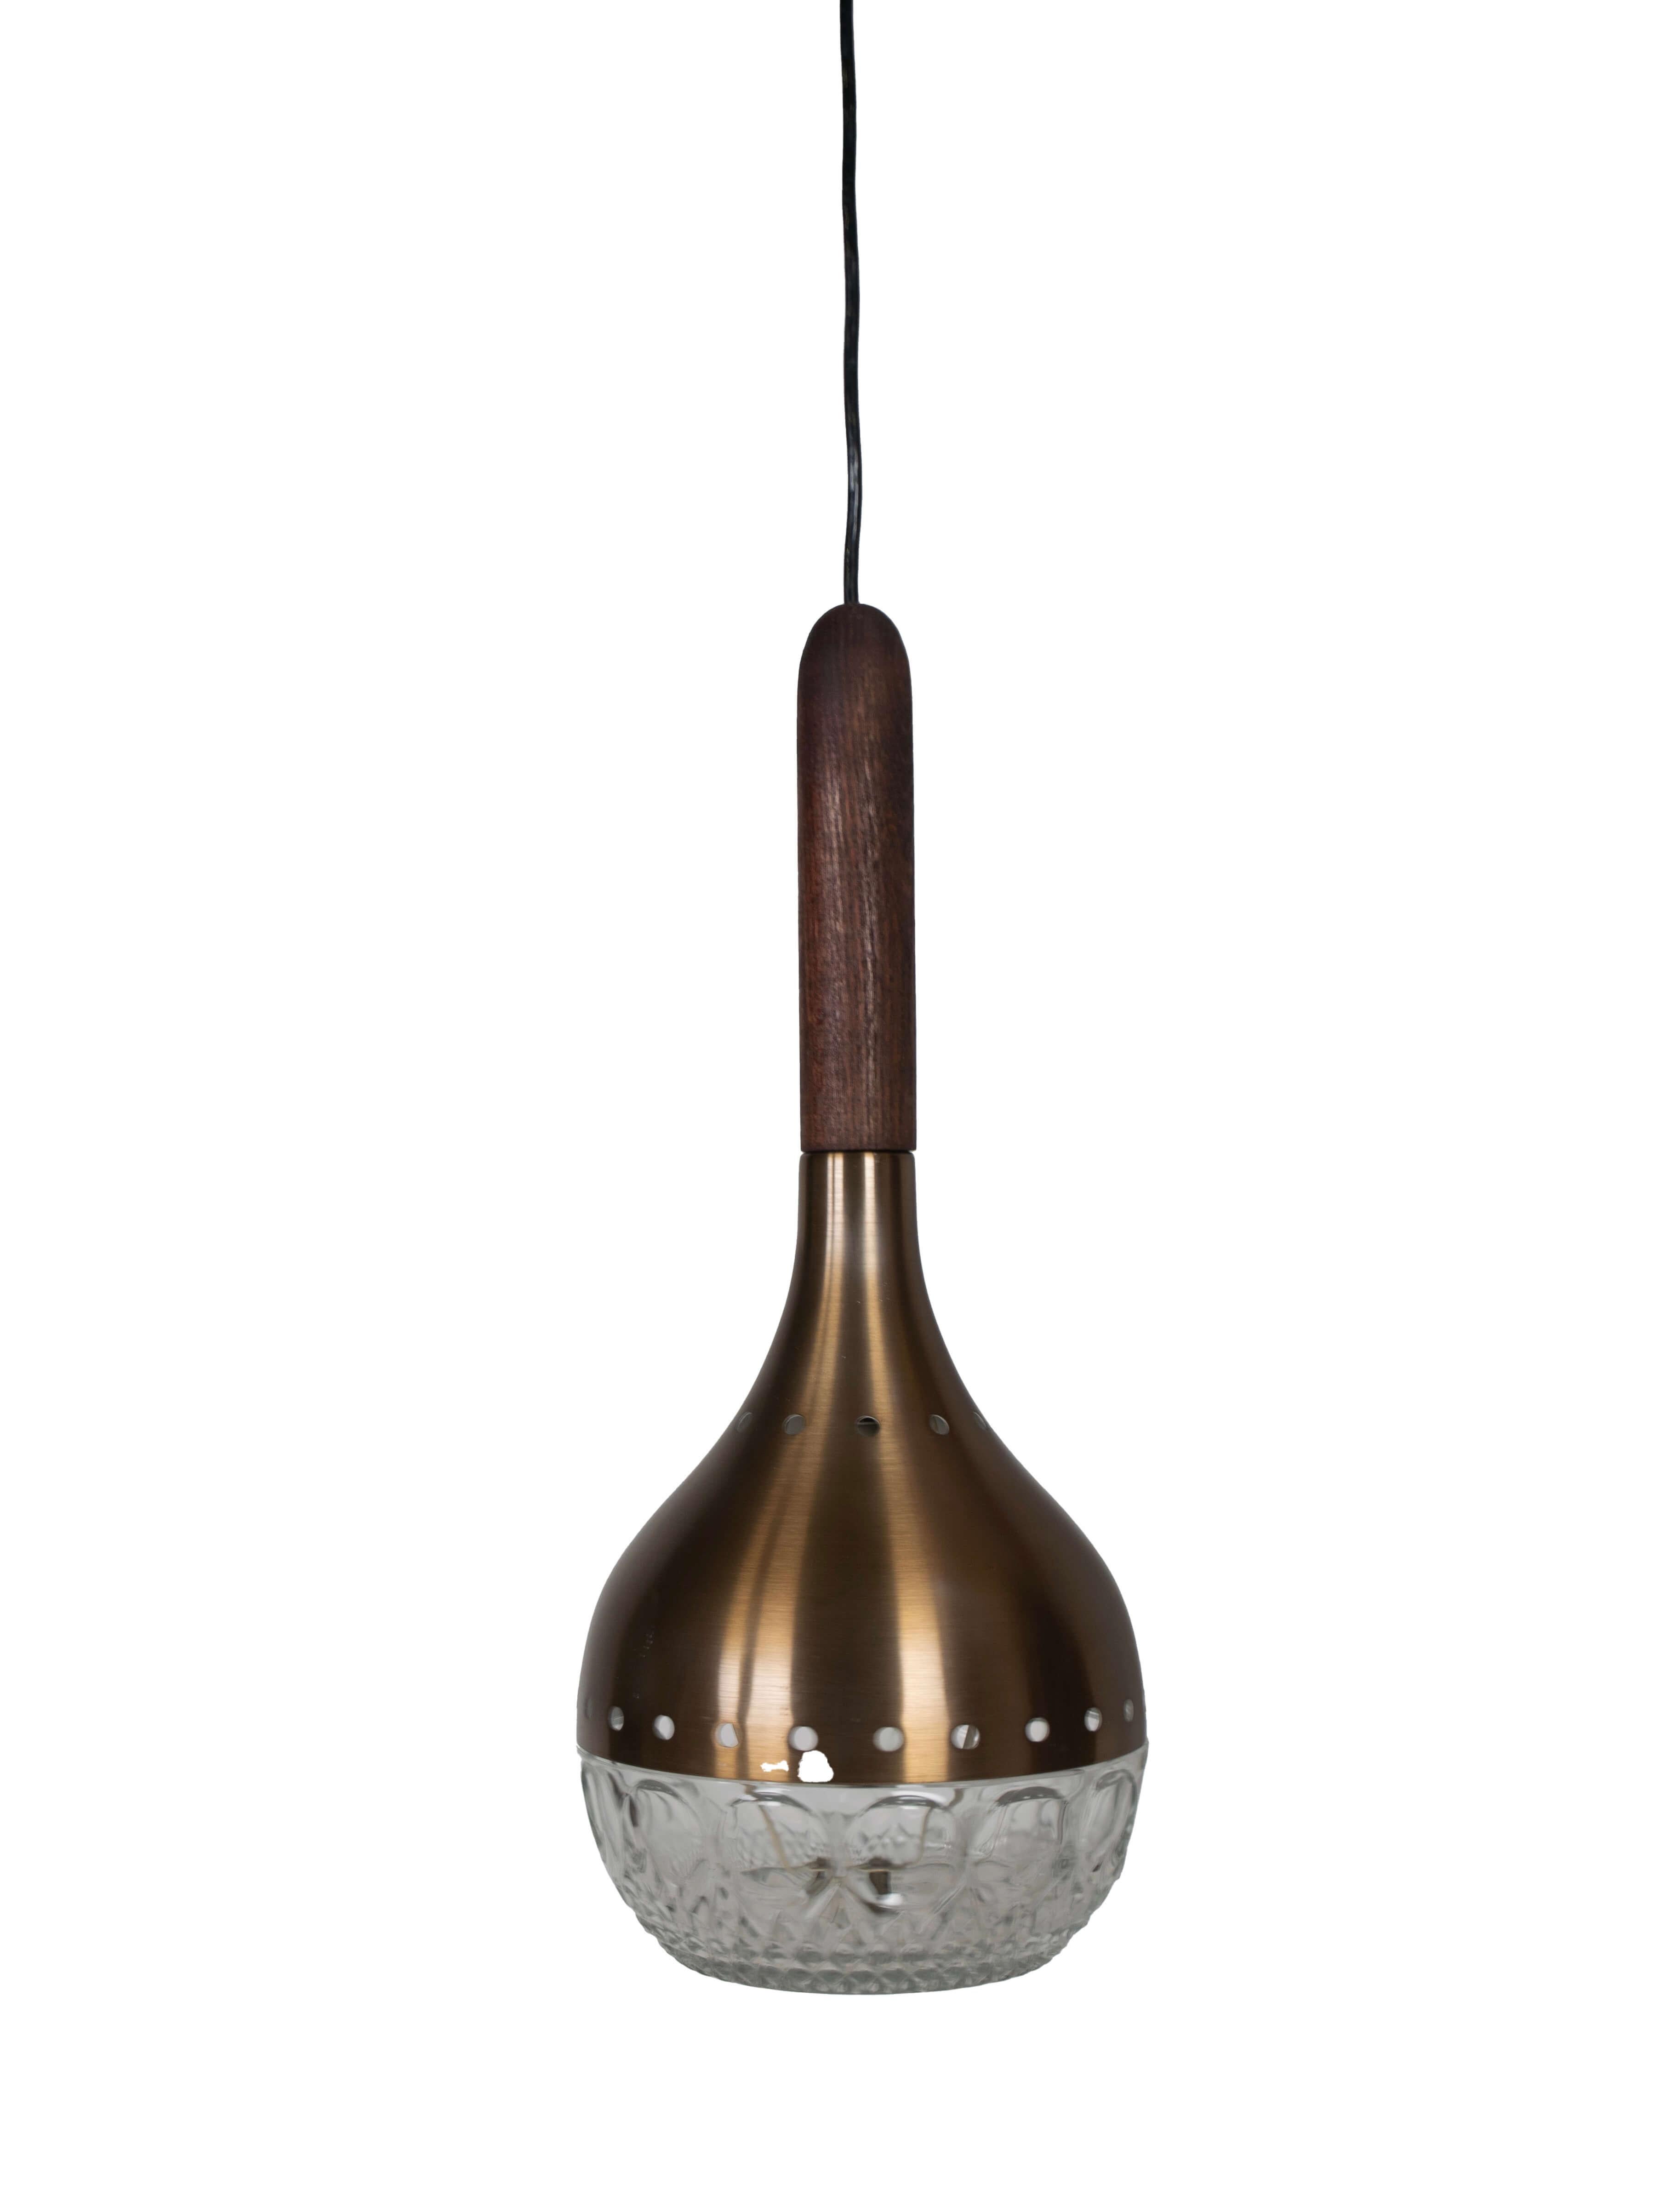 Charming pendant by Stilux Milano, Italy mid-century. This pendant is made of copper, wood and crystal glass. The top is a copper element that can be mounted to the ceiling. The lamp has a diamond-shaped glass, with a copper top and a wooden